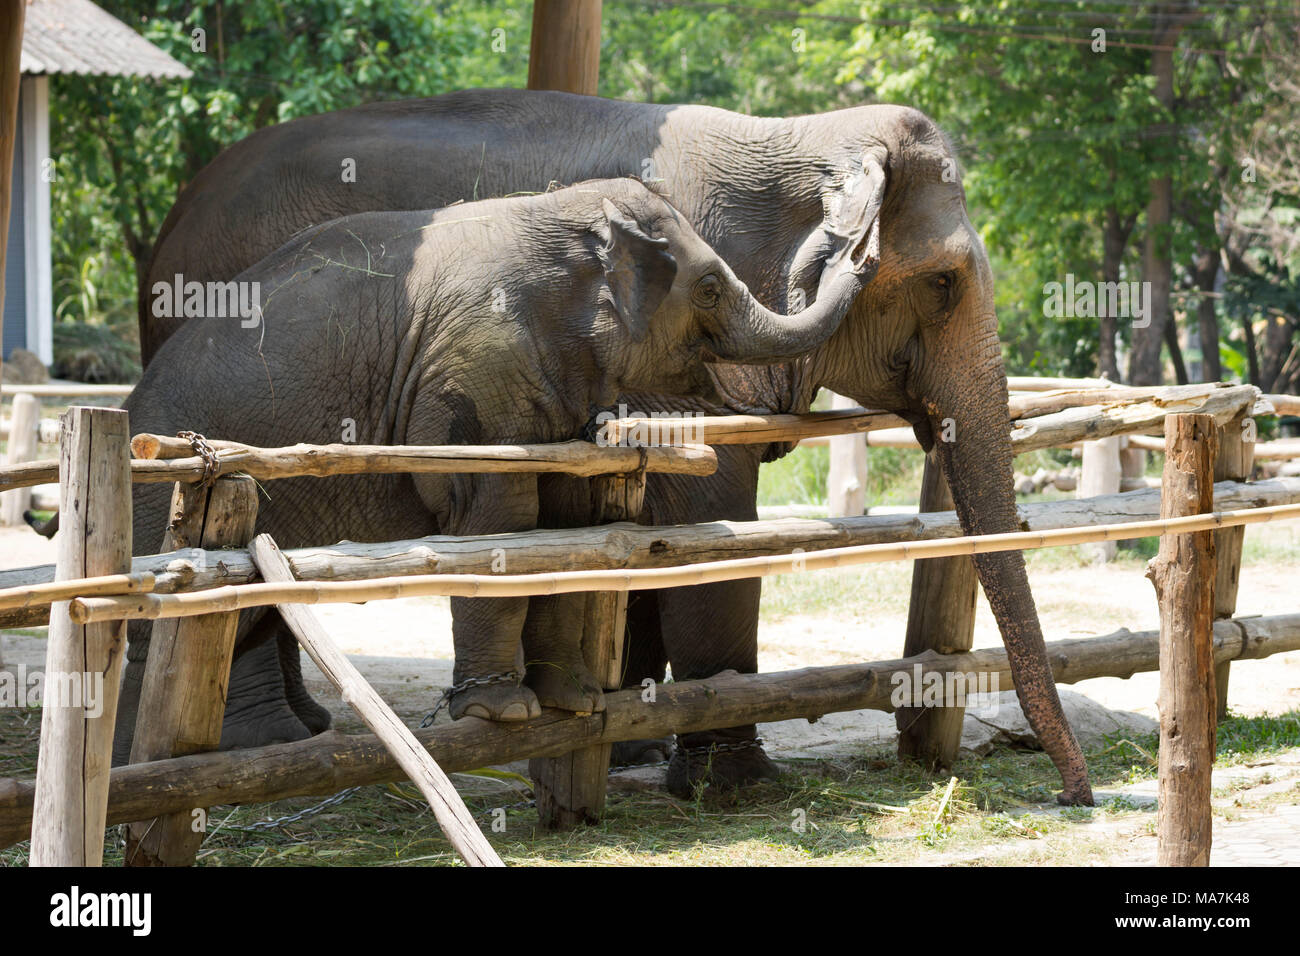 LAMPANG, THAILAND - April 15, 2016  : Daily Elephant show and training at The Thai Elephant Conservation Center (TECC), Mahouts show how to train elep Stock Photo